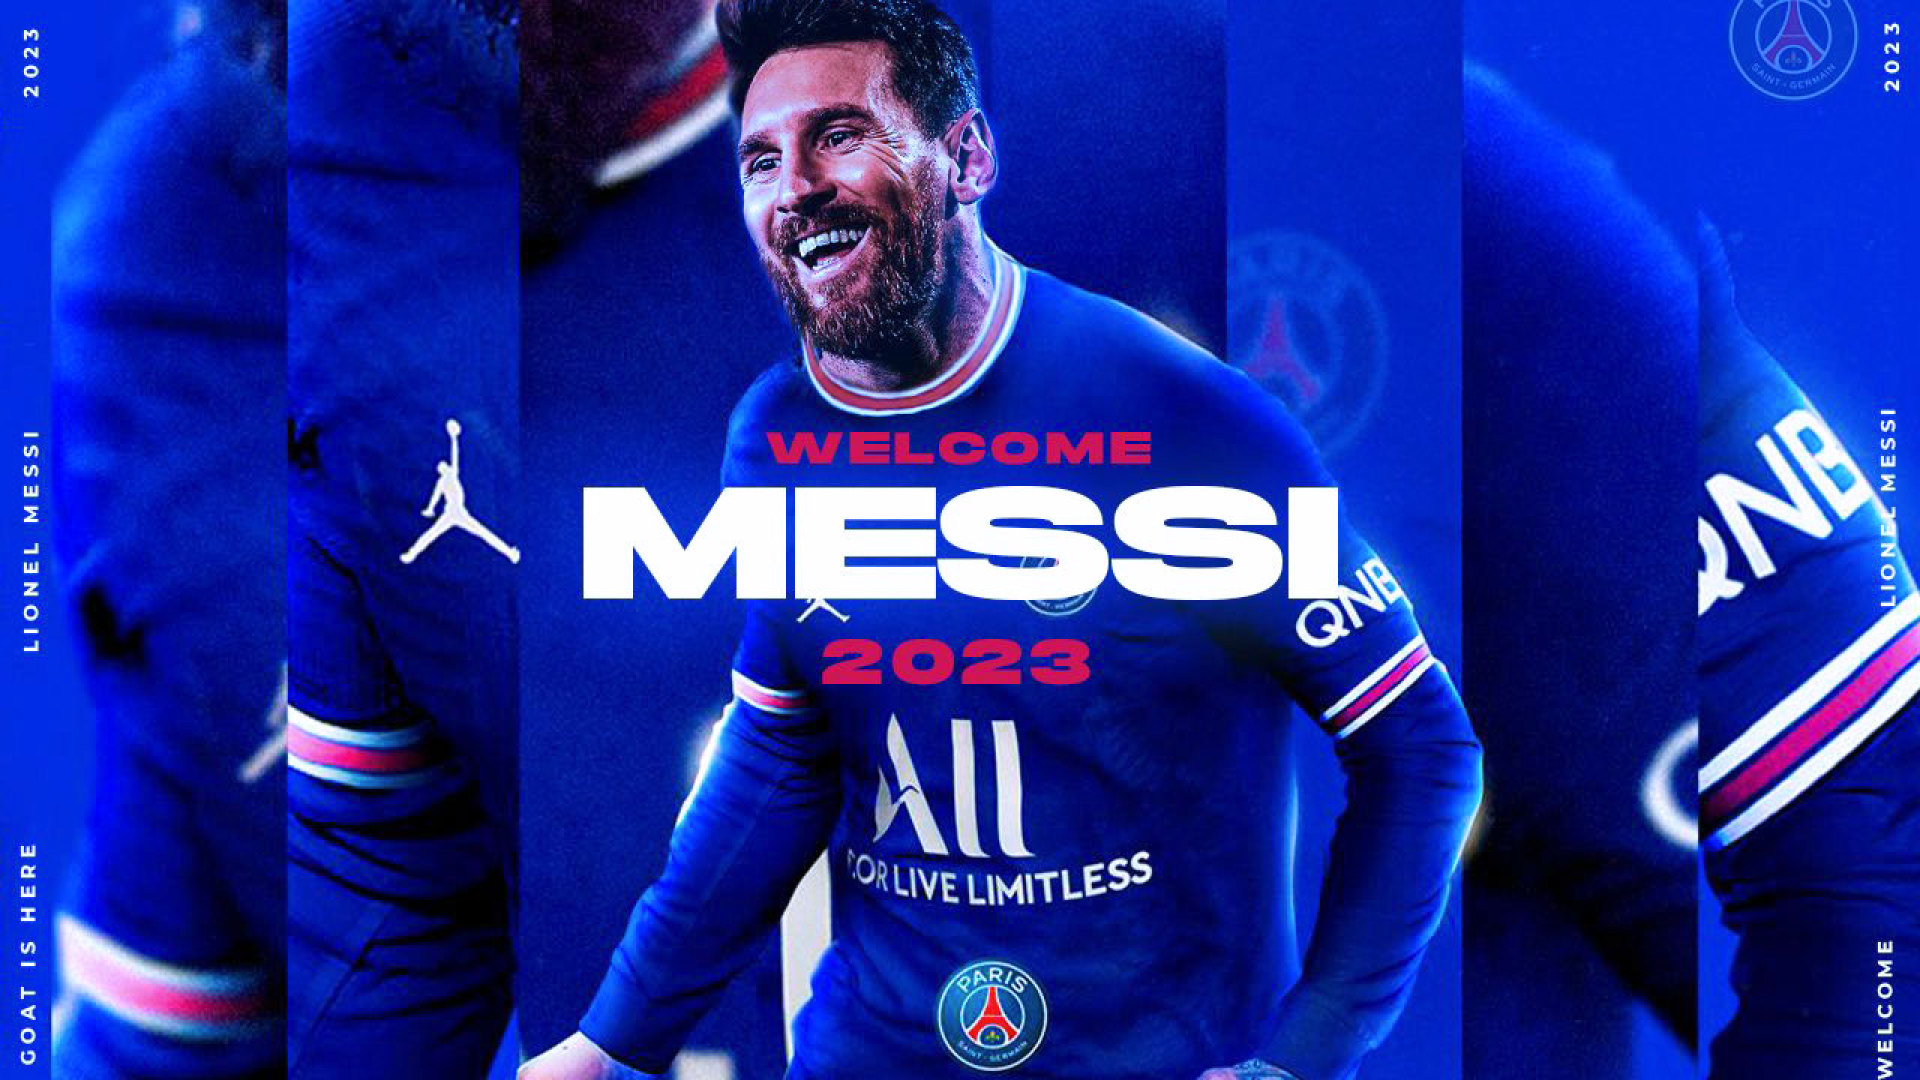 1500+ messi psg 4k wallpaper for pc to show your love for PSG team